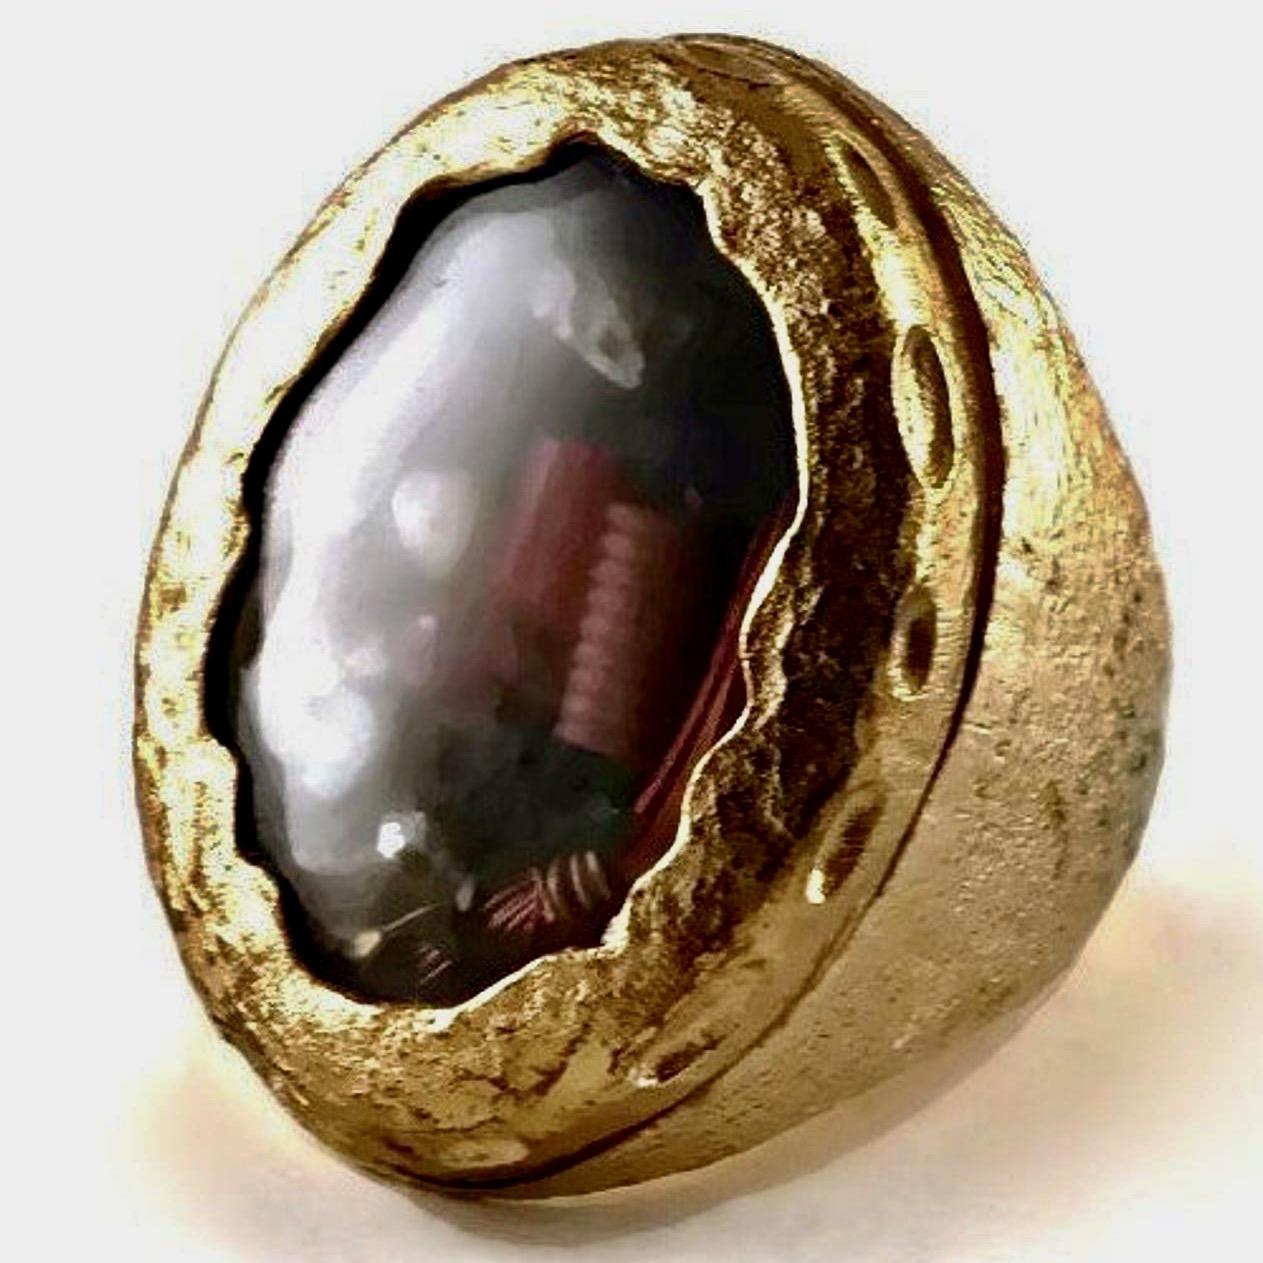 Vintage CHRISTIAN LACROIX Movable Nautical Charm Statement Ring

Measurements:
Center Piece Height: 1 2/8 inches (3.17 cm)

Features:
- 100% Authentic CHRISTIAN LACROIX.
- Textured massive ring.
- Movable nautical motif rice pearls, shells, beads,